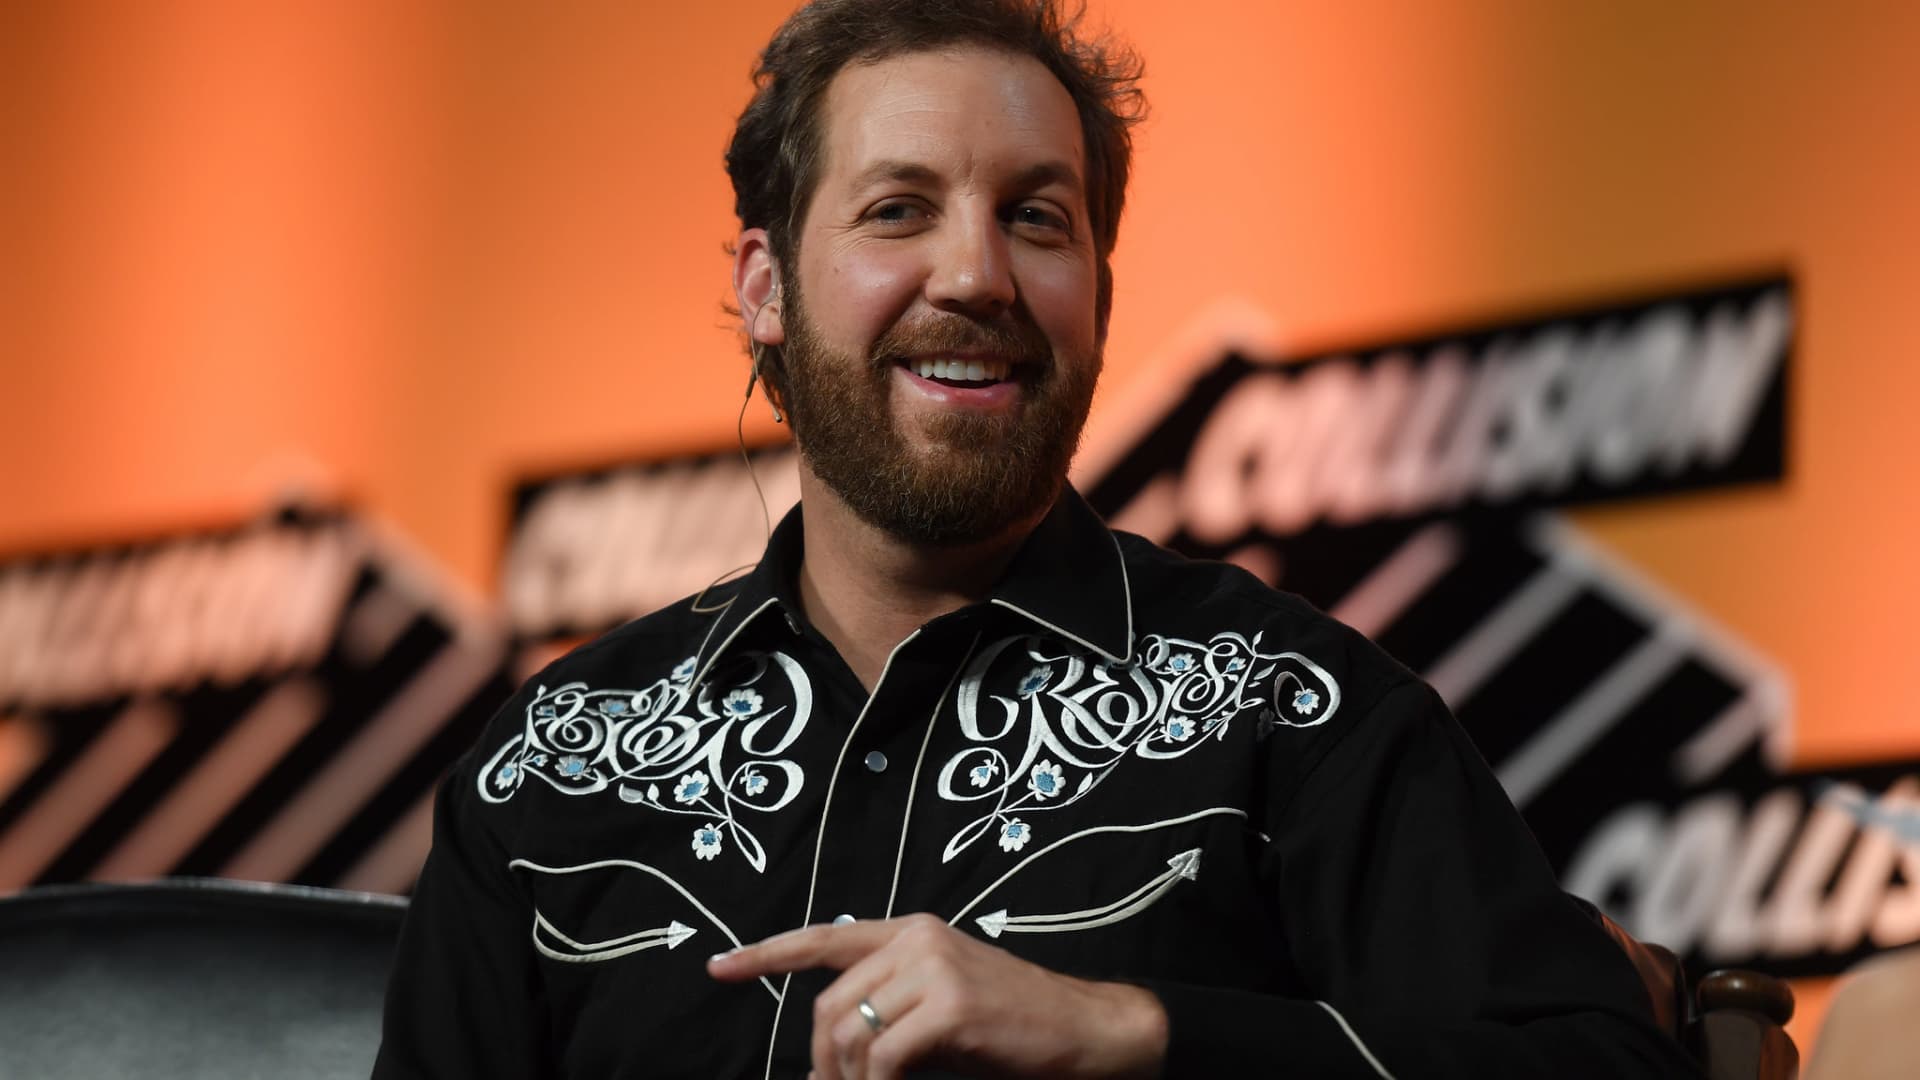 Twitter investor Chris Sacca says Elon Musk is 'alone right now'